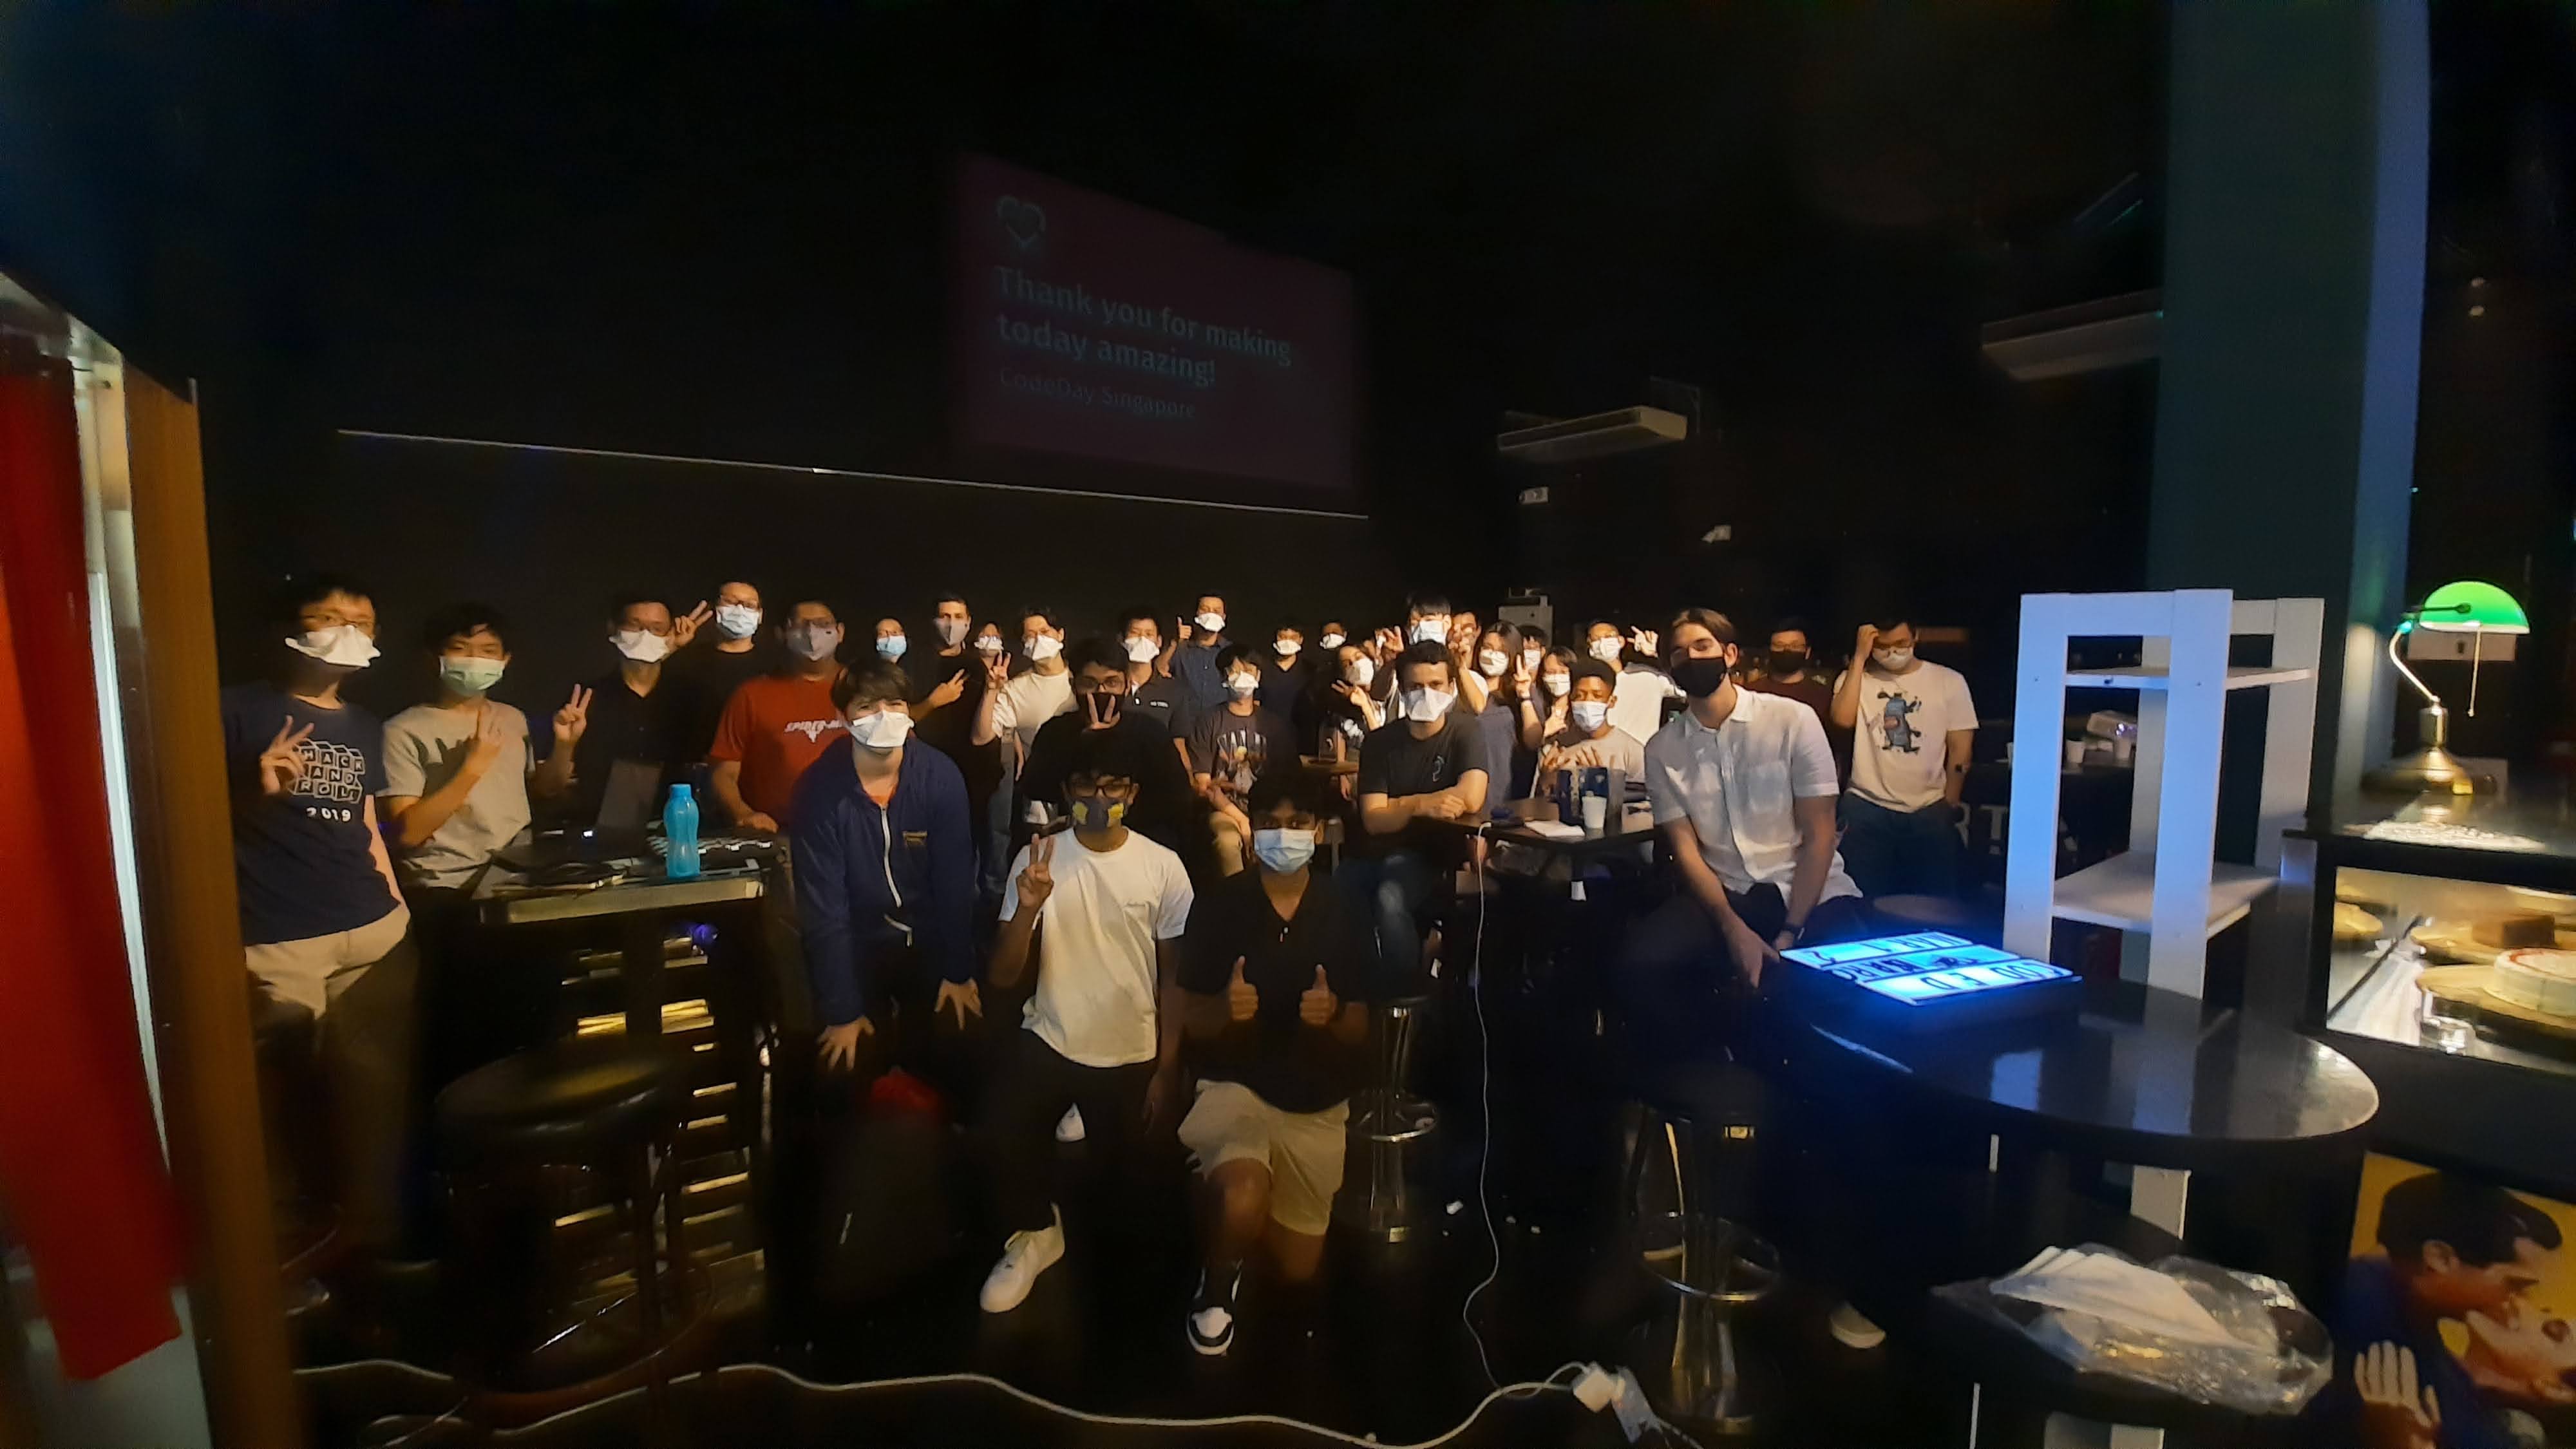 A group photo with all the participants of CodeDay during the opening ceremony